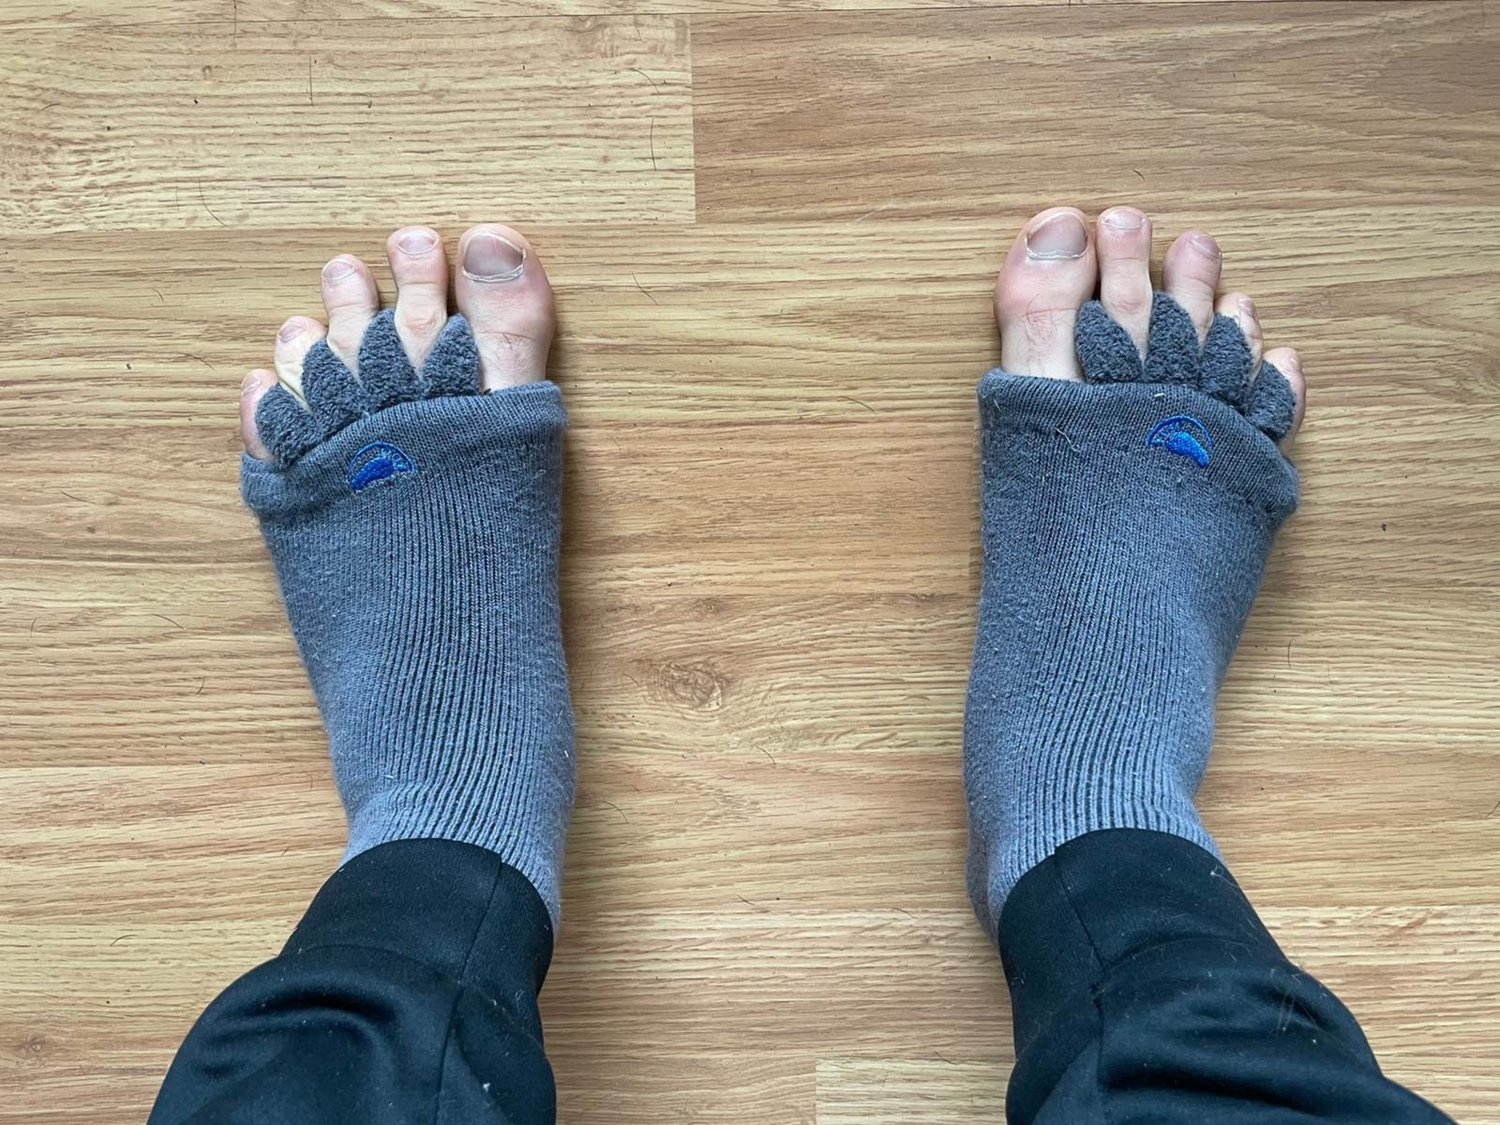 Benefits of the Toe Alignment Socks, by oliverobinson